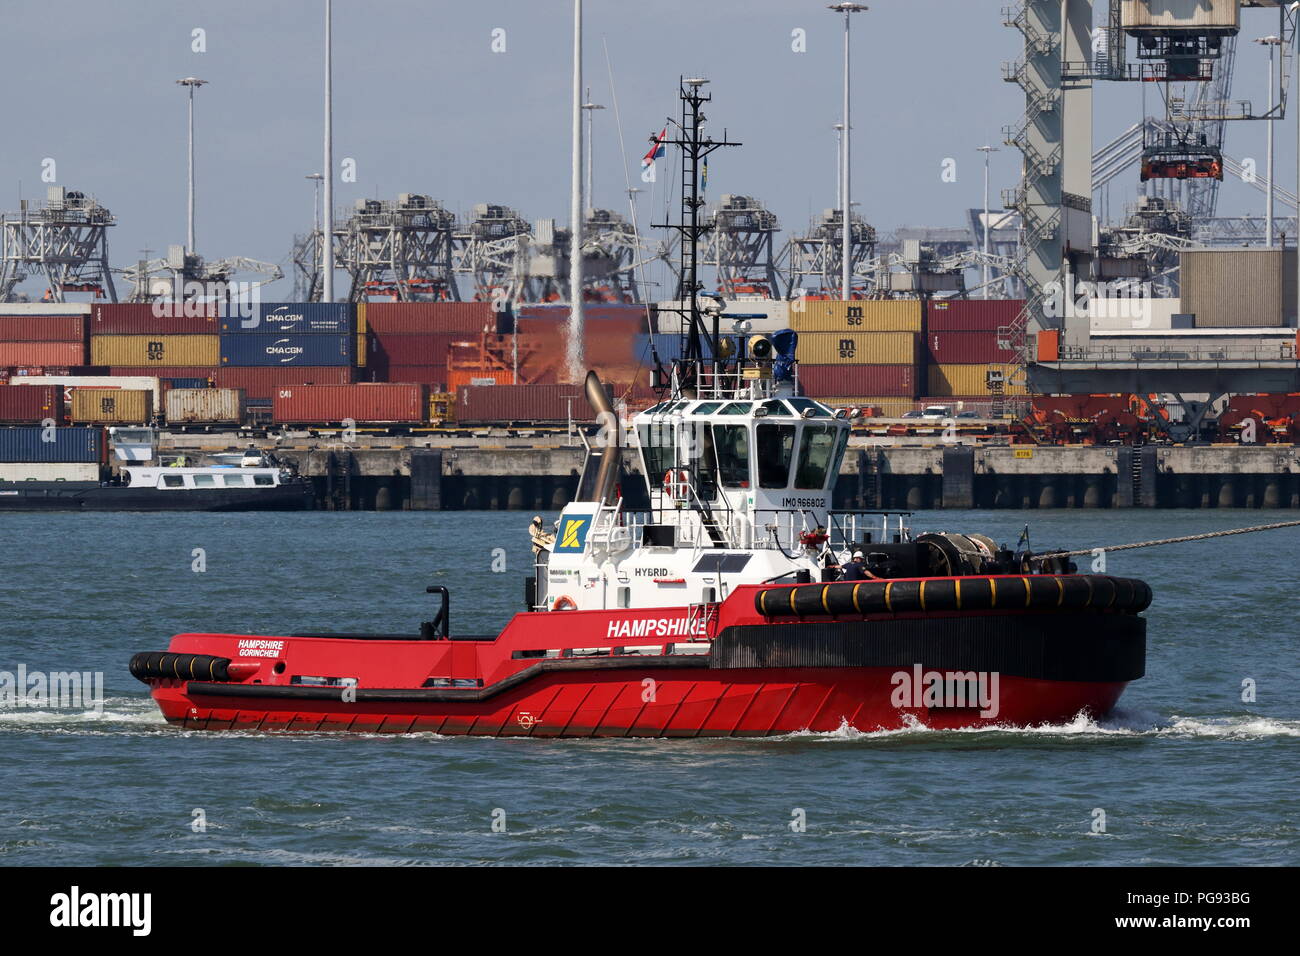 The harbor tug Hampshire works on 13 July 2018 in the port of Rotterdam. Stock Photo